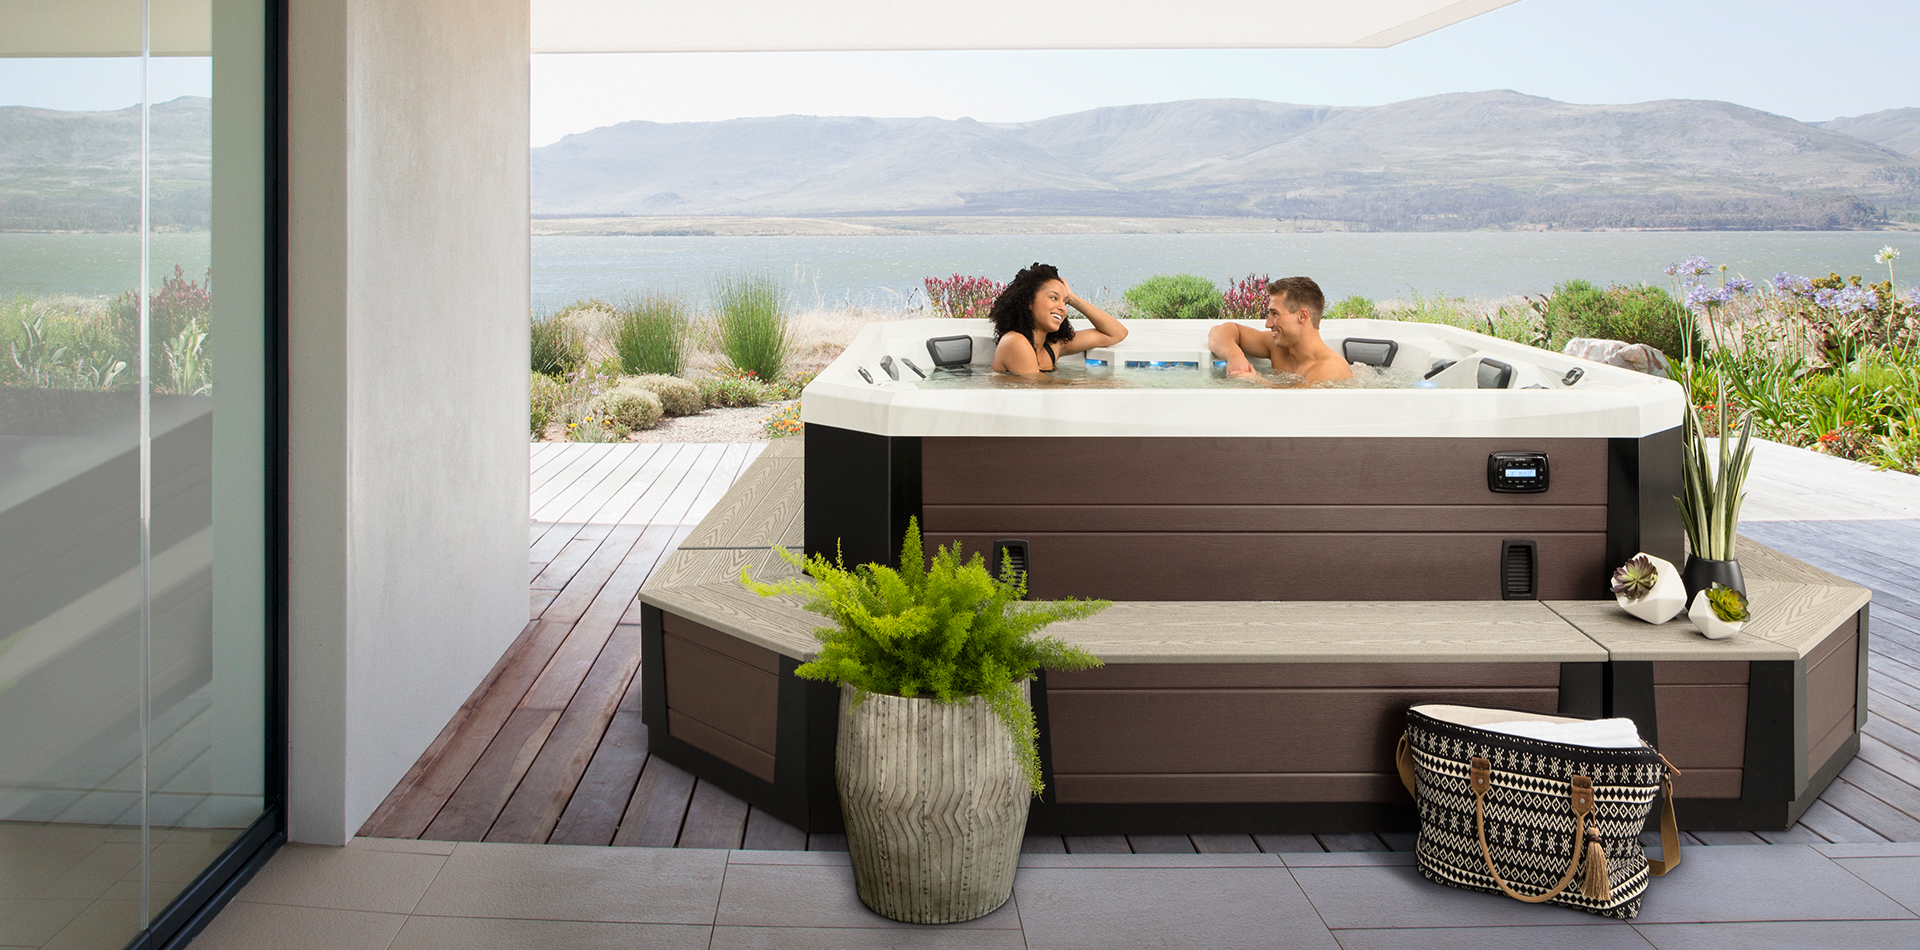 beauty image showing 8 person hot tubs